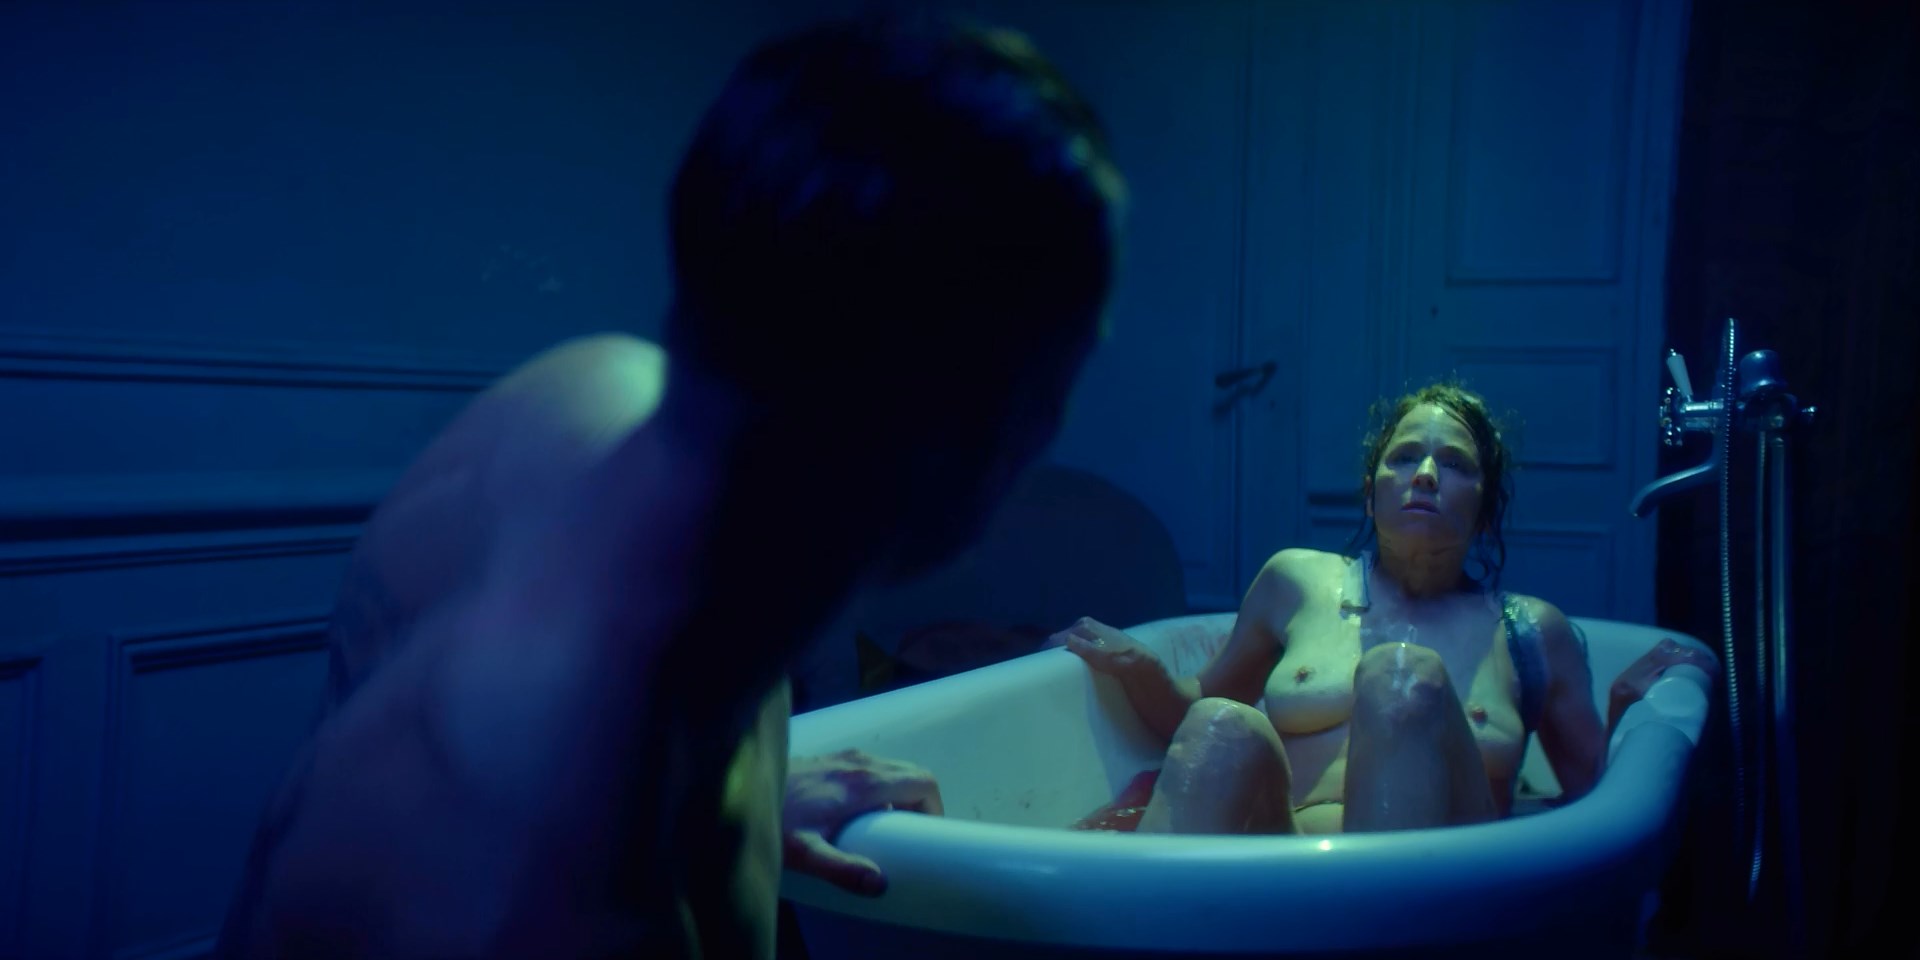 Suzanne Clement nude, Oulaya Amamra sexy - Vampires s01e04-06 (2020)